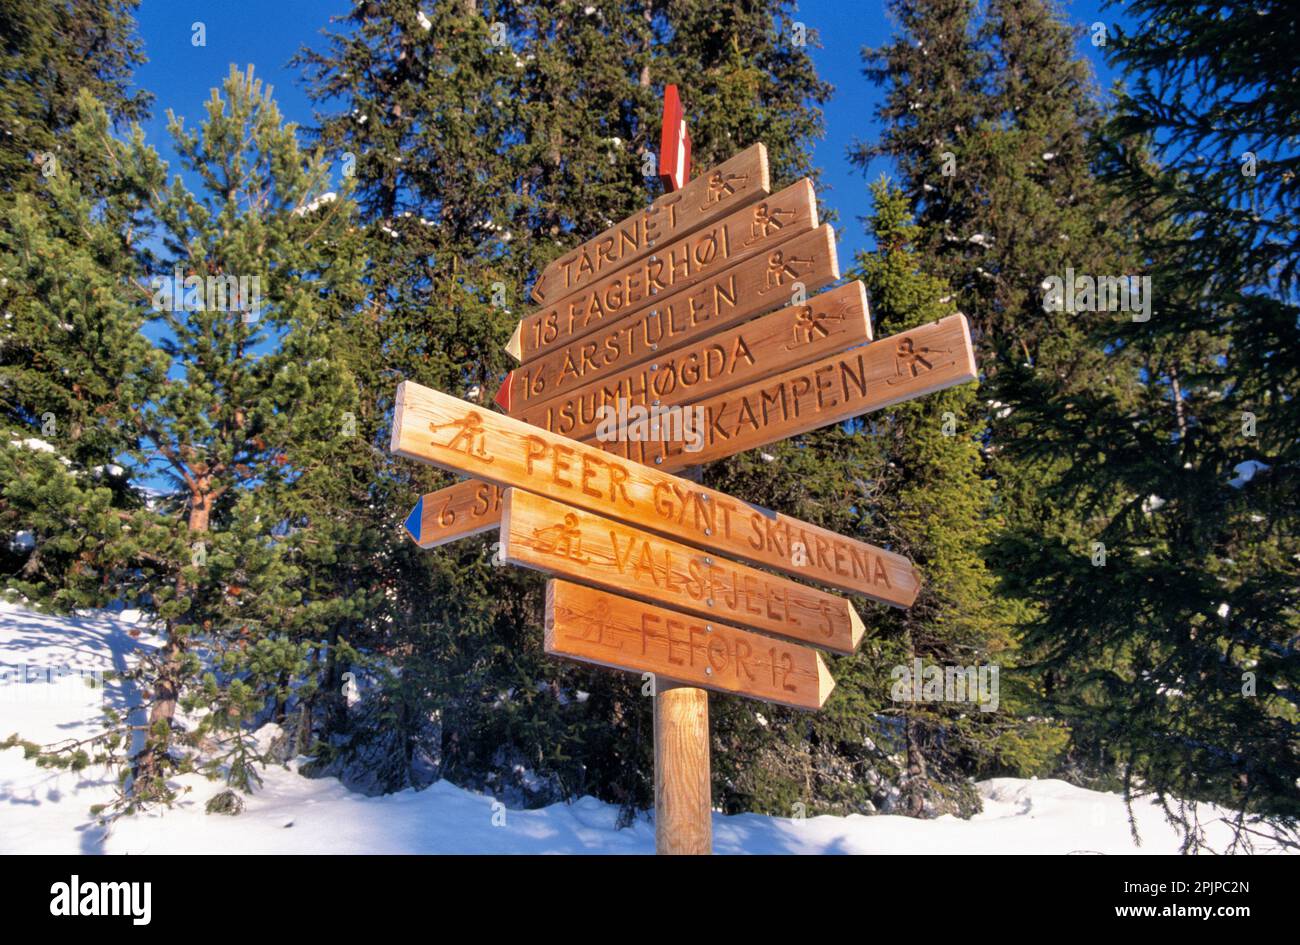 Wooden sign post with directions for cross-country skiers to destinations and distances at the Peer Gynt ski arena in Norway Stock Photo